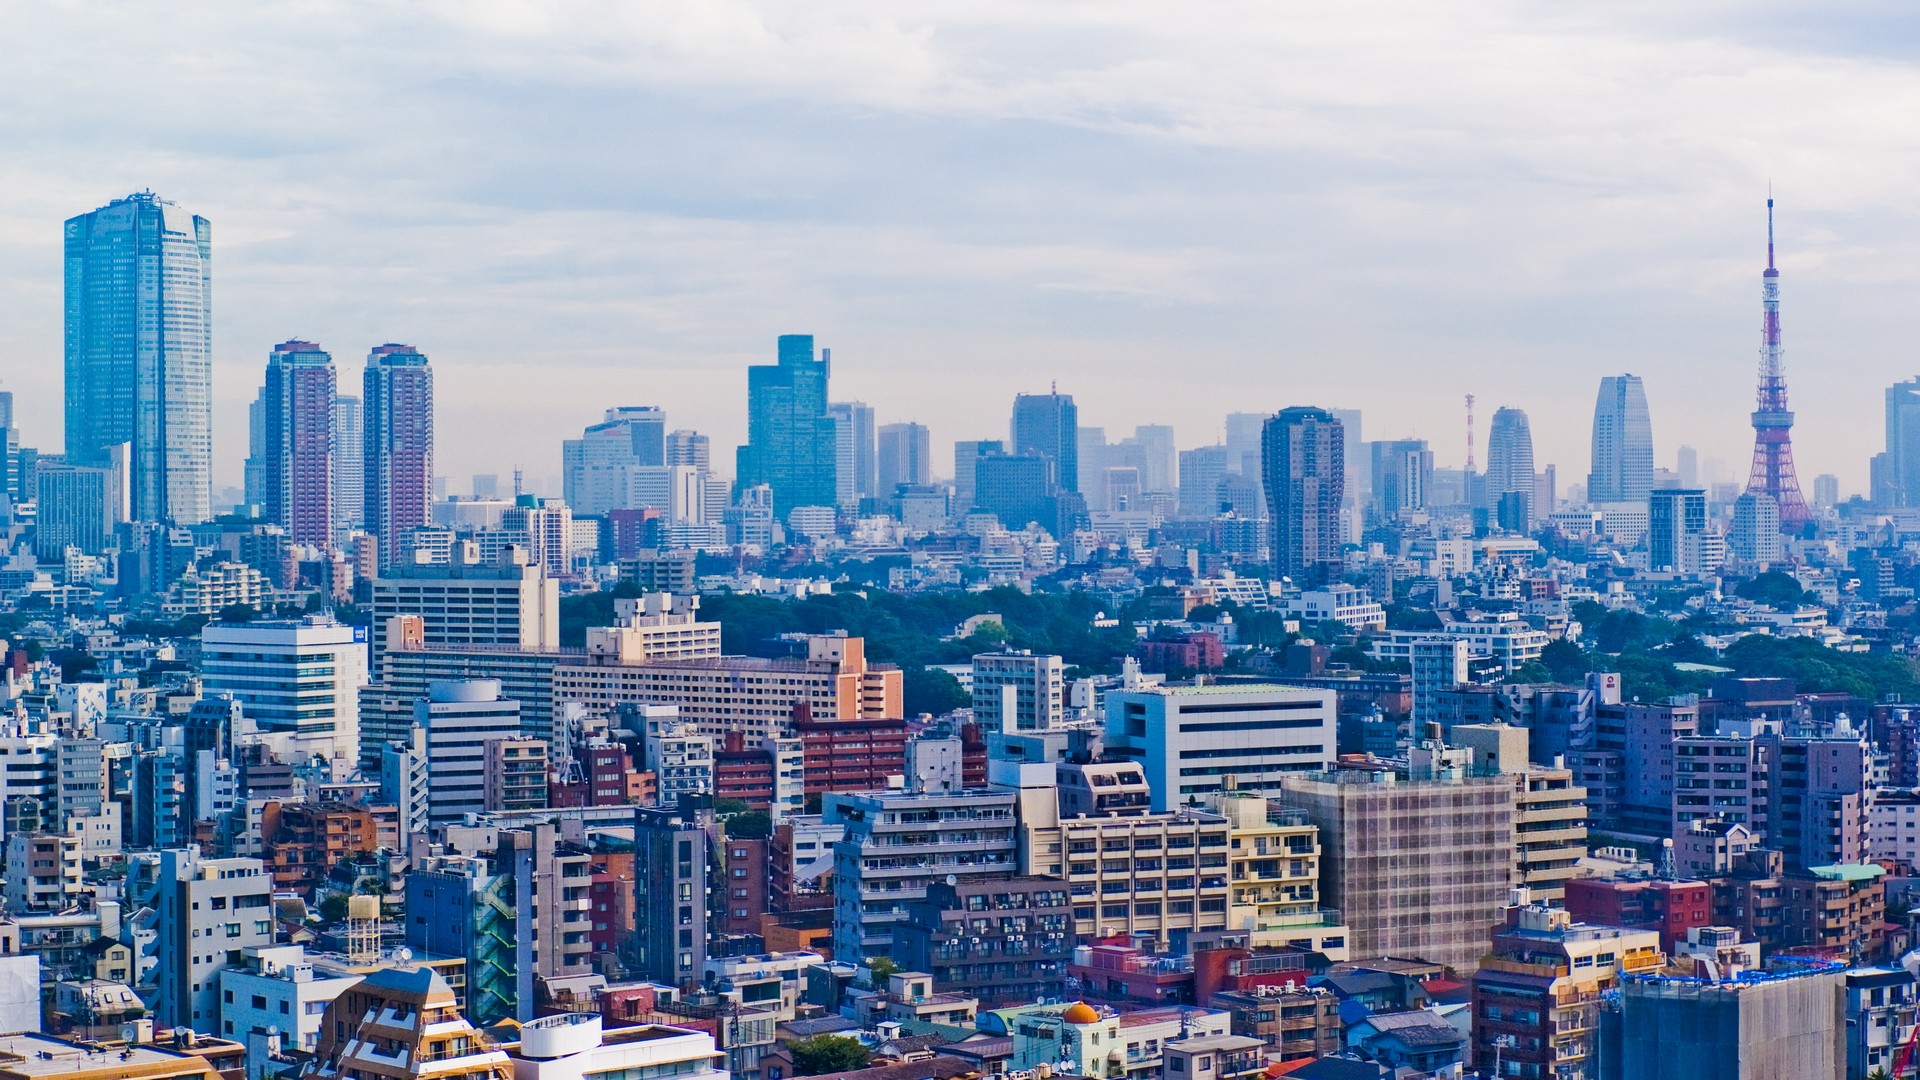 japan, Tokyo, Cityscapes, Skylines, Buildings, Skyscrapers, Asia, Asian, Architecture, City, Skyline, Citylife Wallpaper